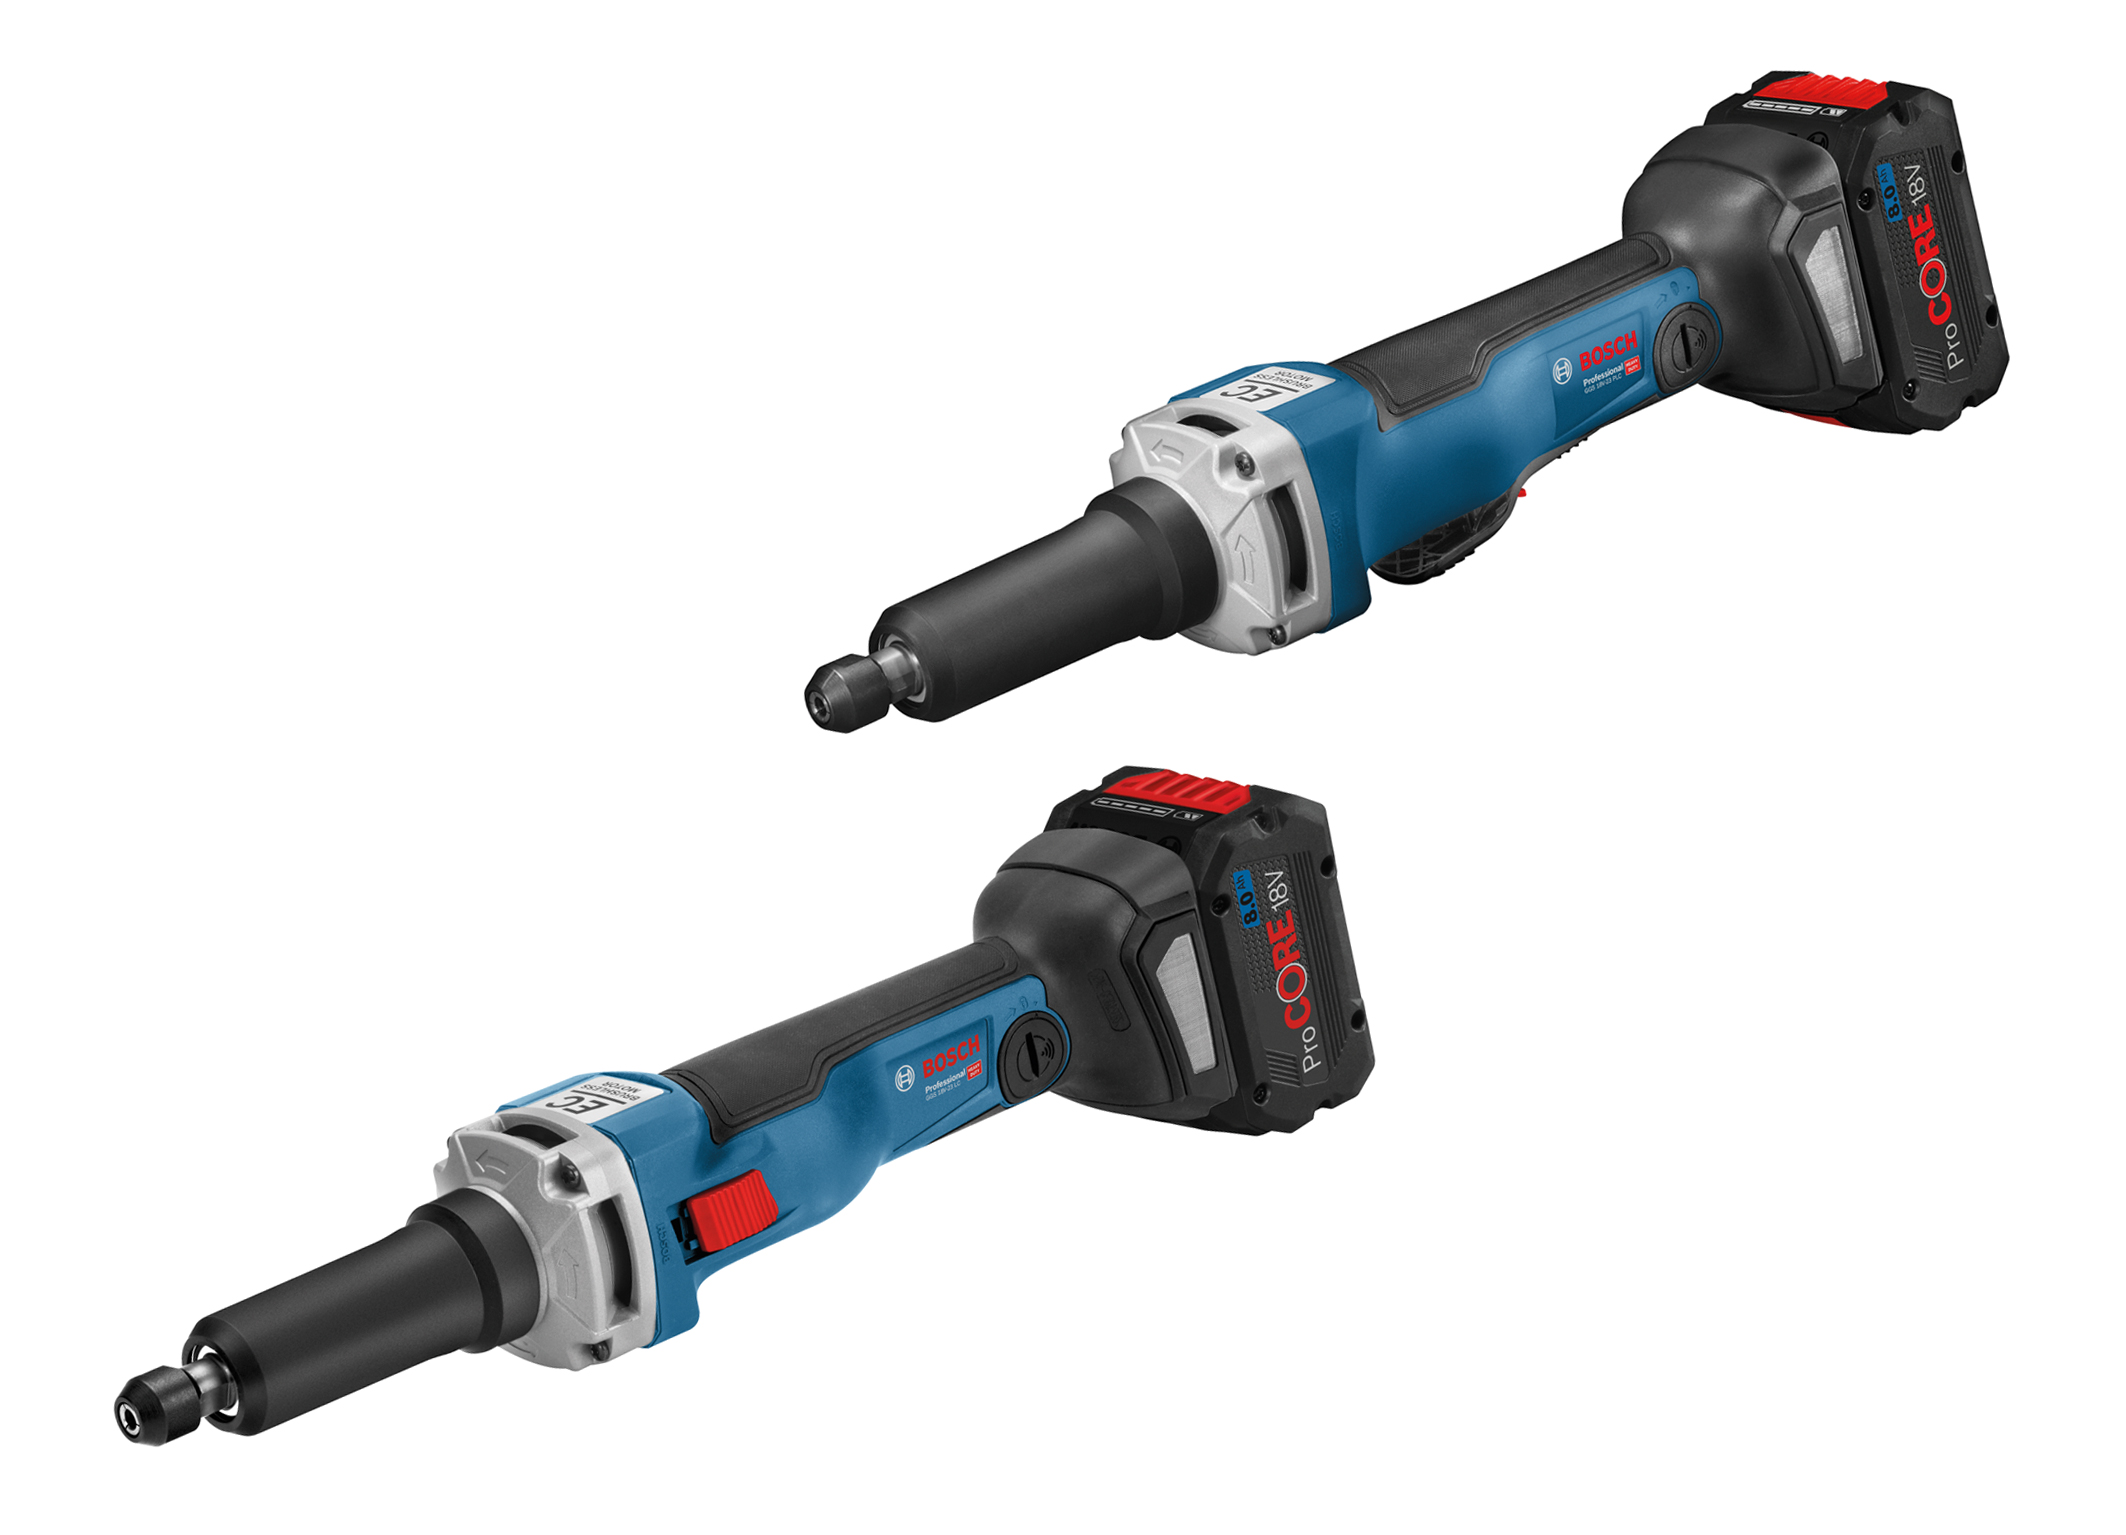 As powerful as a corded tool: New Bosch 18 volt cordless straight grinders for pros